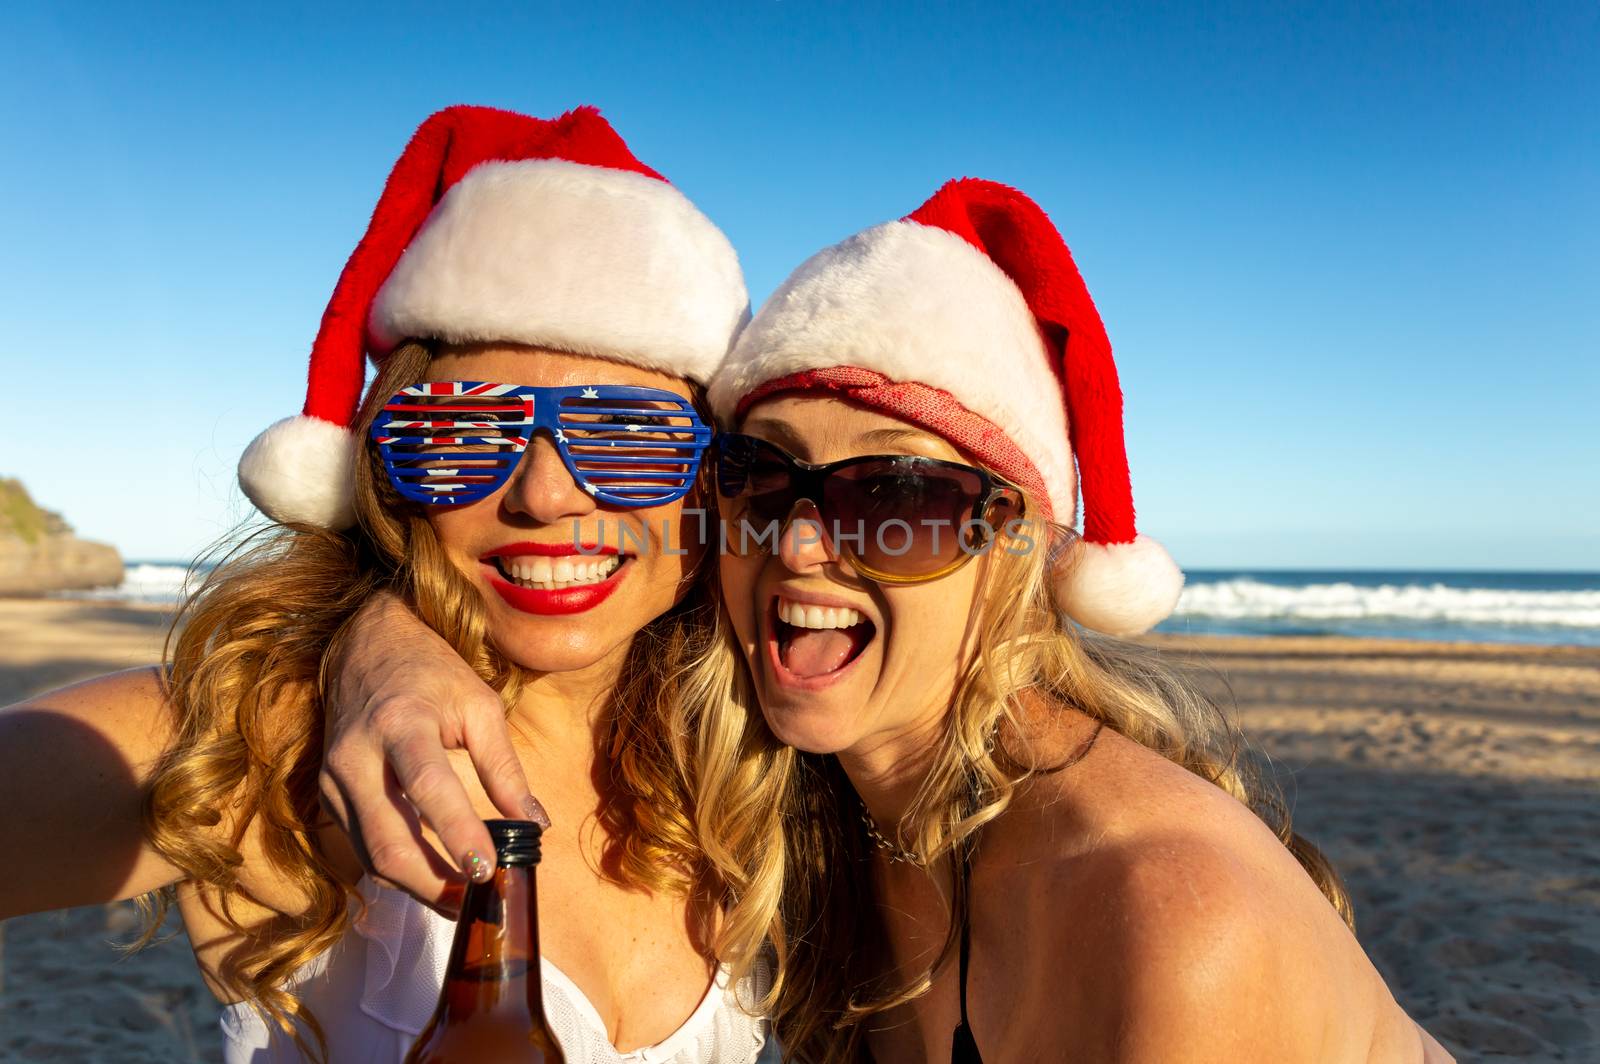 Australians reveling on beach at Christmas time by lovleah